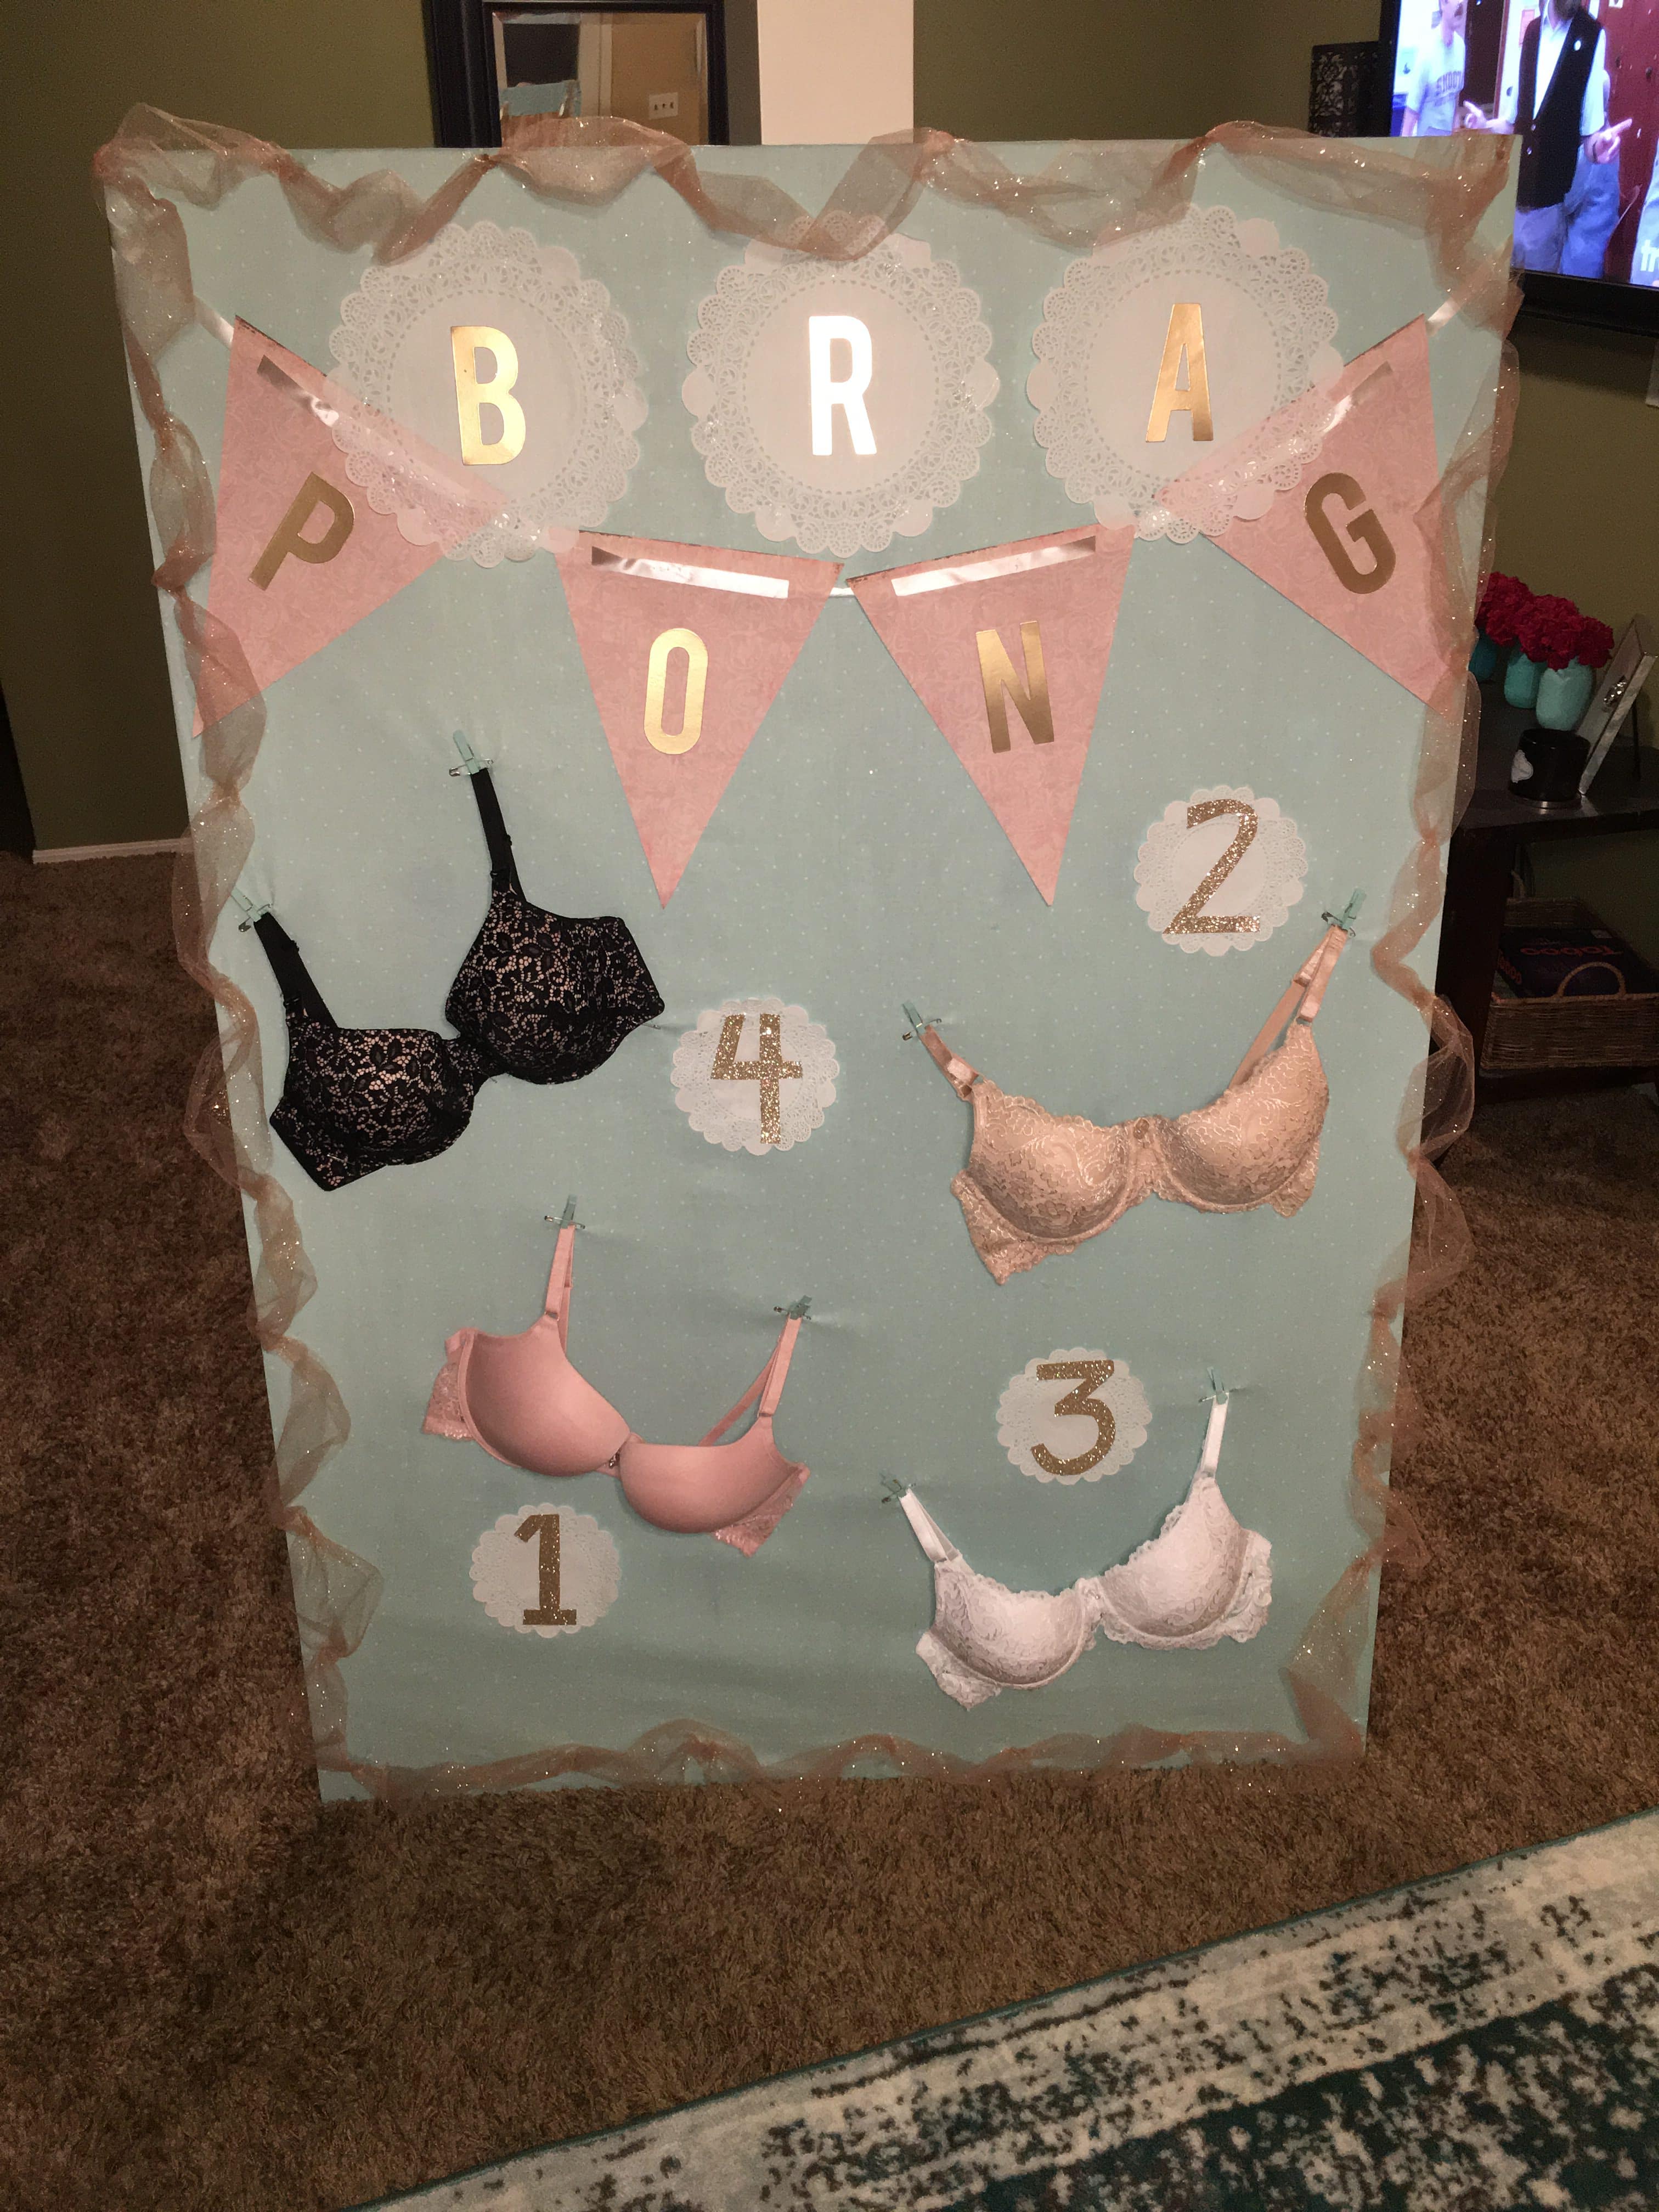 Bra pong is one of the funniest bachelorette party games ever